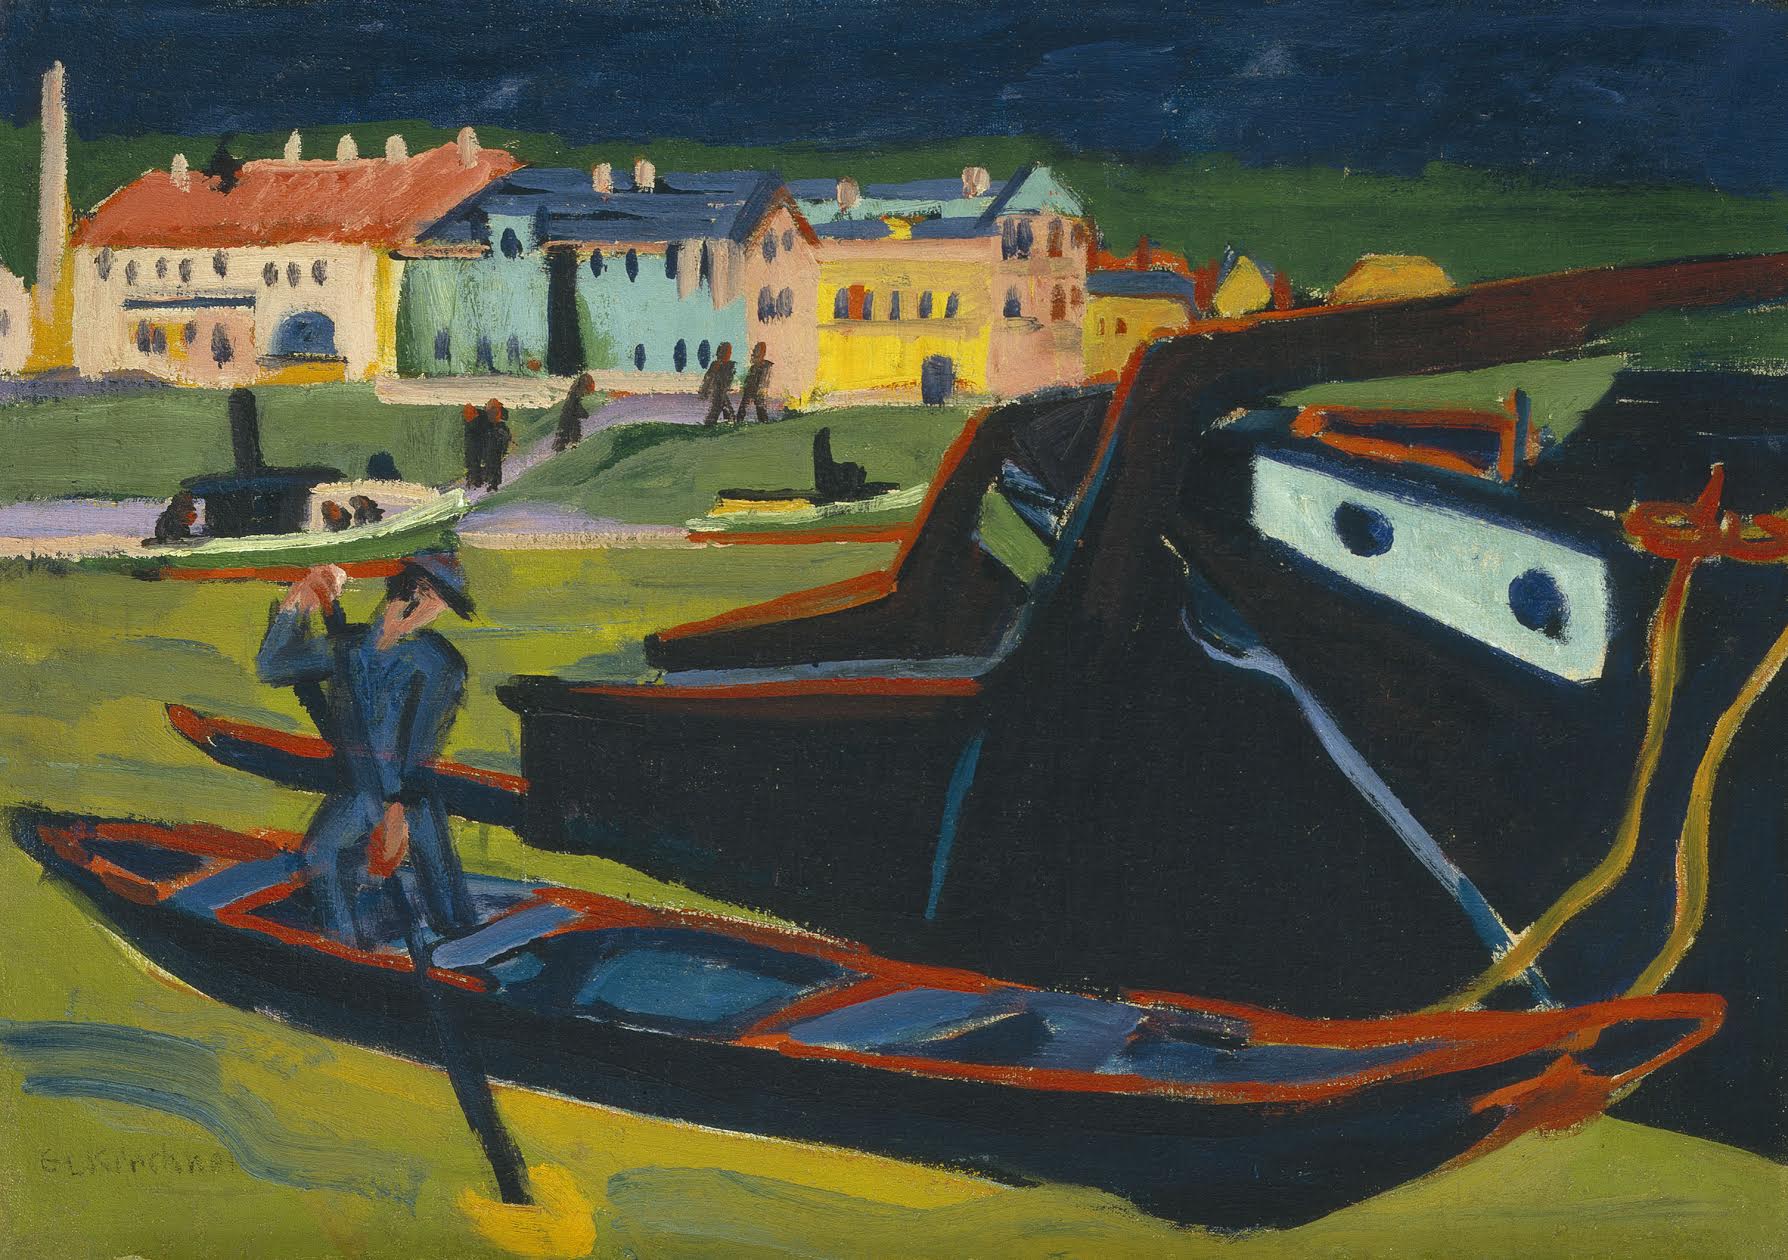 Boats on the Elbe near Dresden by Ernst Ludwig Kirchner - 1910 (reworked 1920) - 24 3/8 x 34 3/4 in. (61.9 x 88.3 cm) Indiana University Art Museum